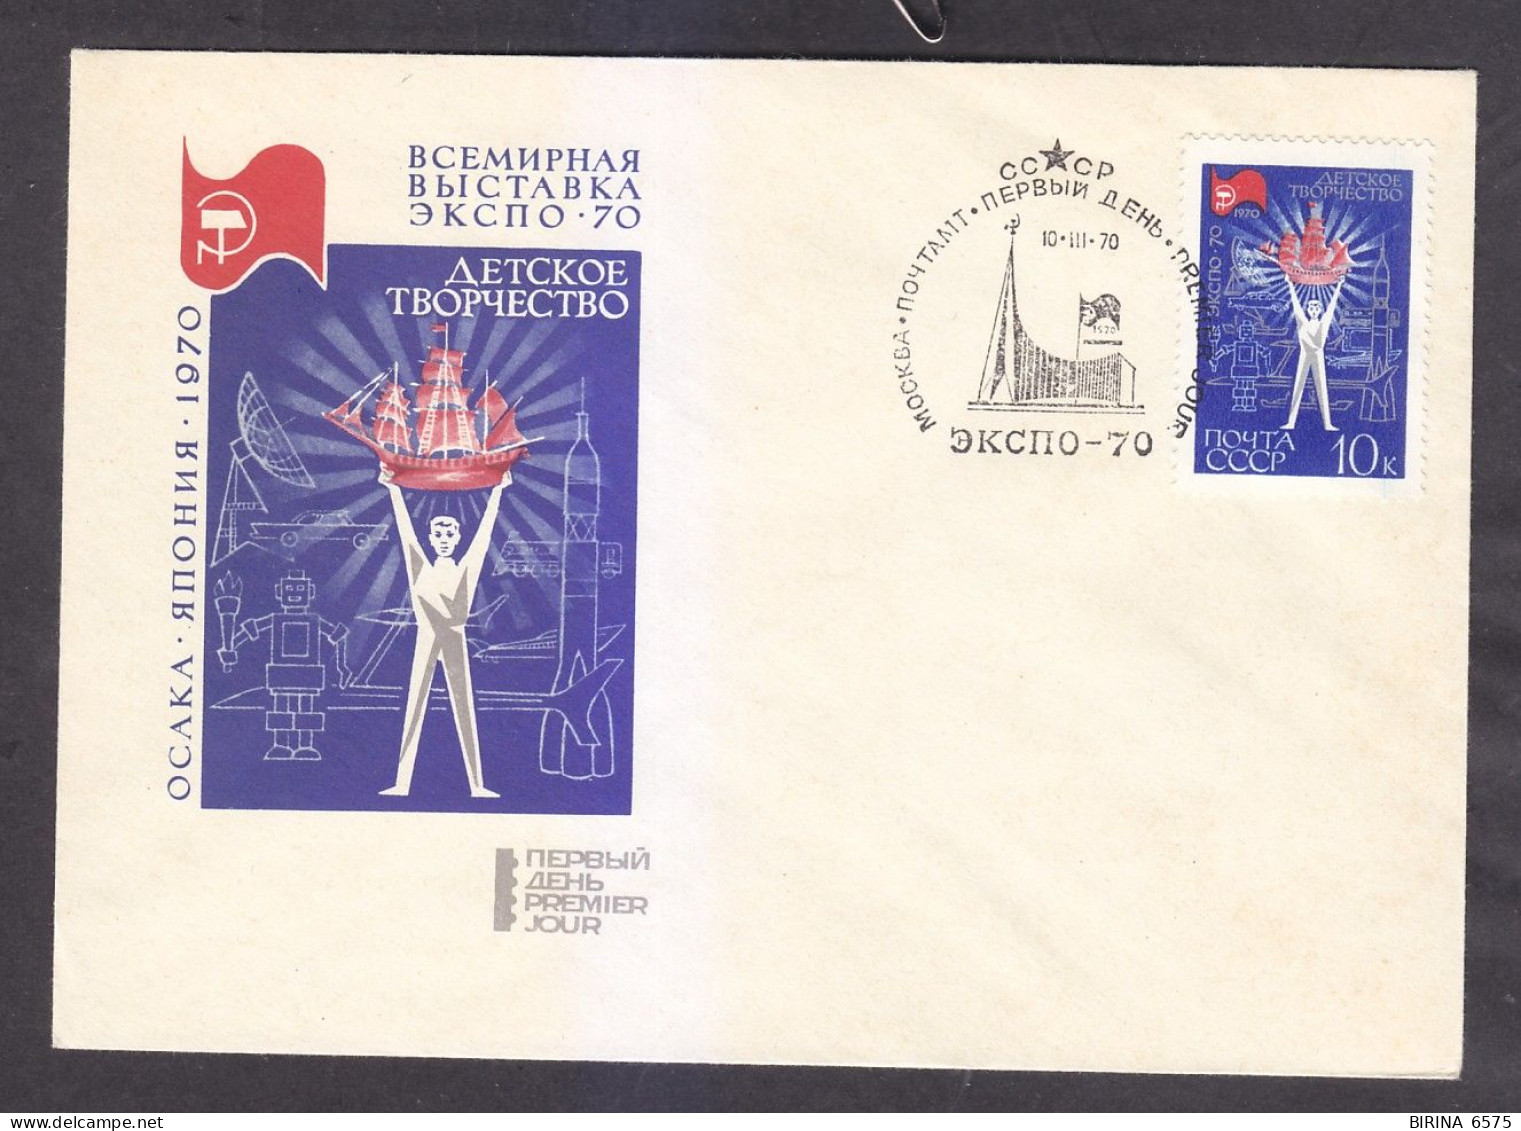 Envelope. USSR. THE WORLD EXHIBITION EXPO - 70. CHILDREN'S CREATIVITY. 1970. - 7-95 - Covers & Documents